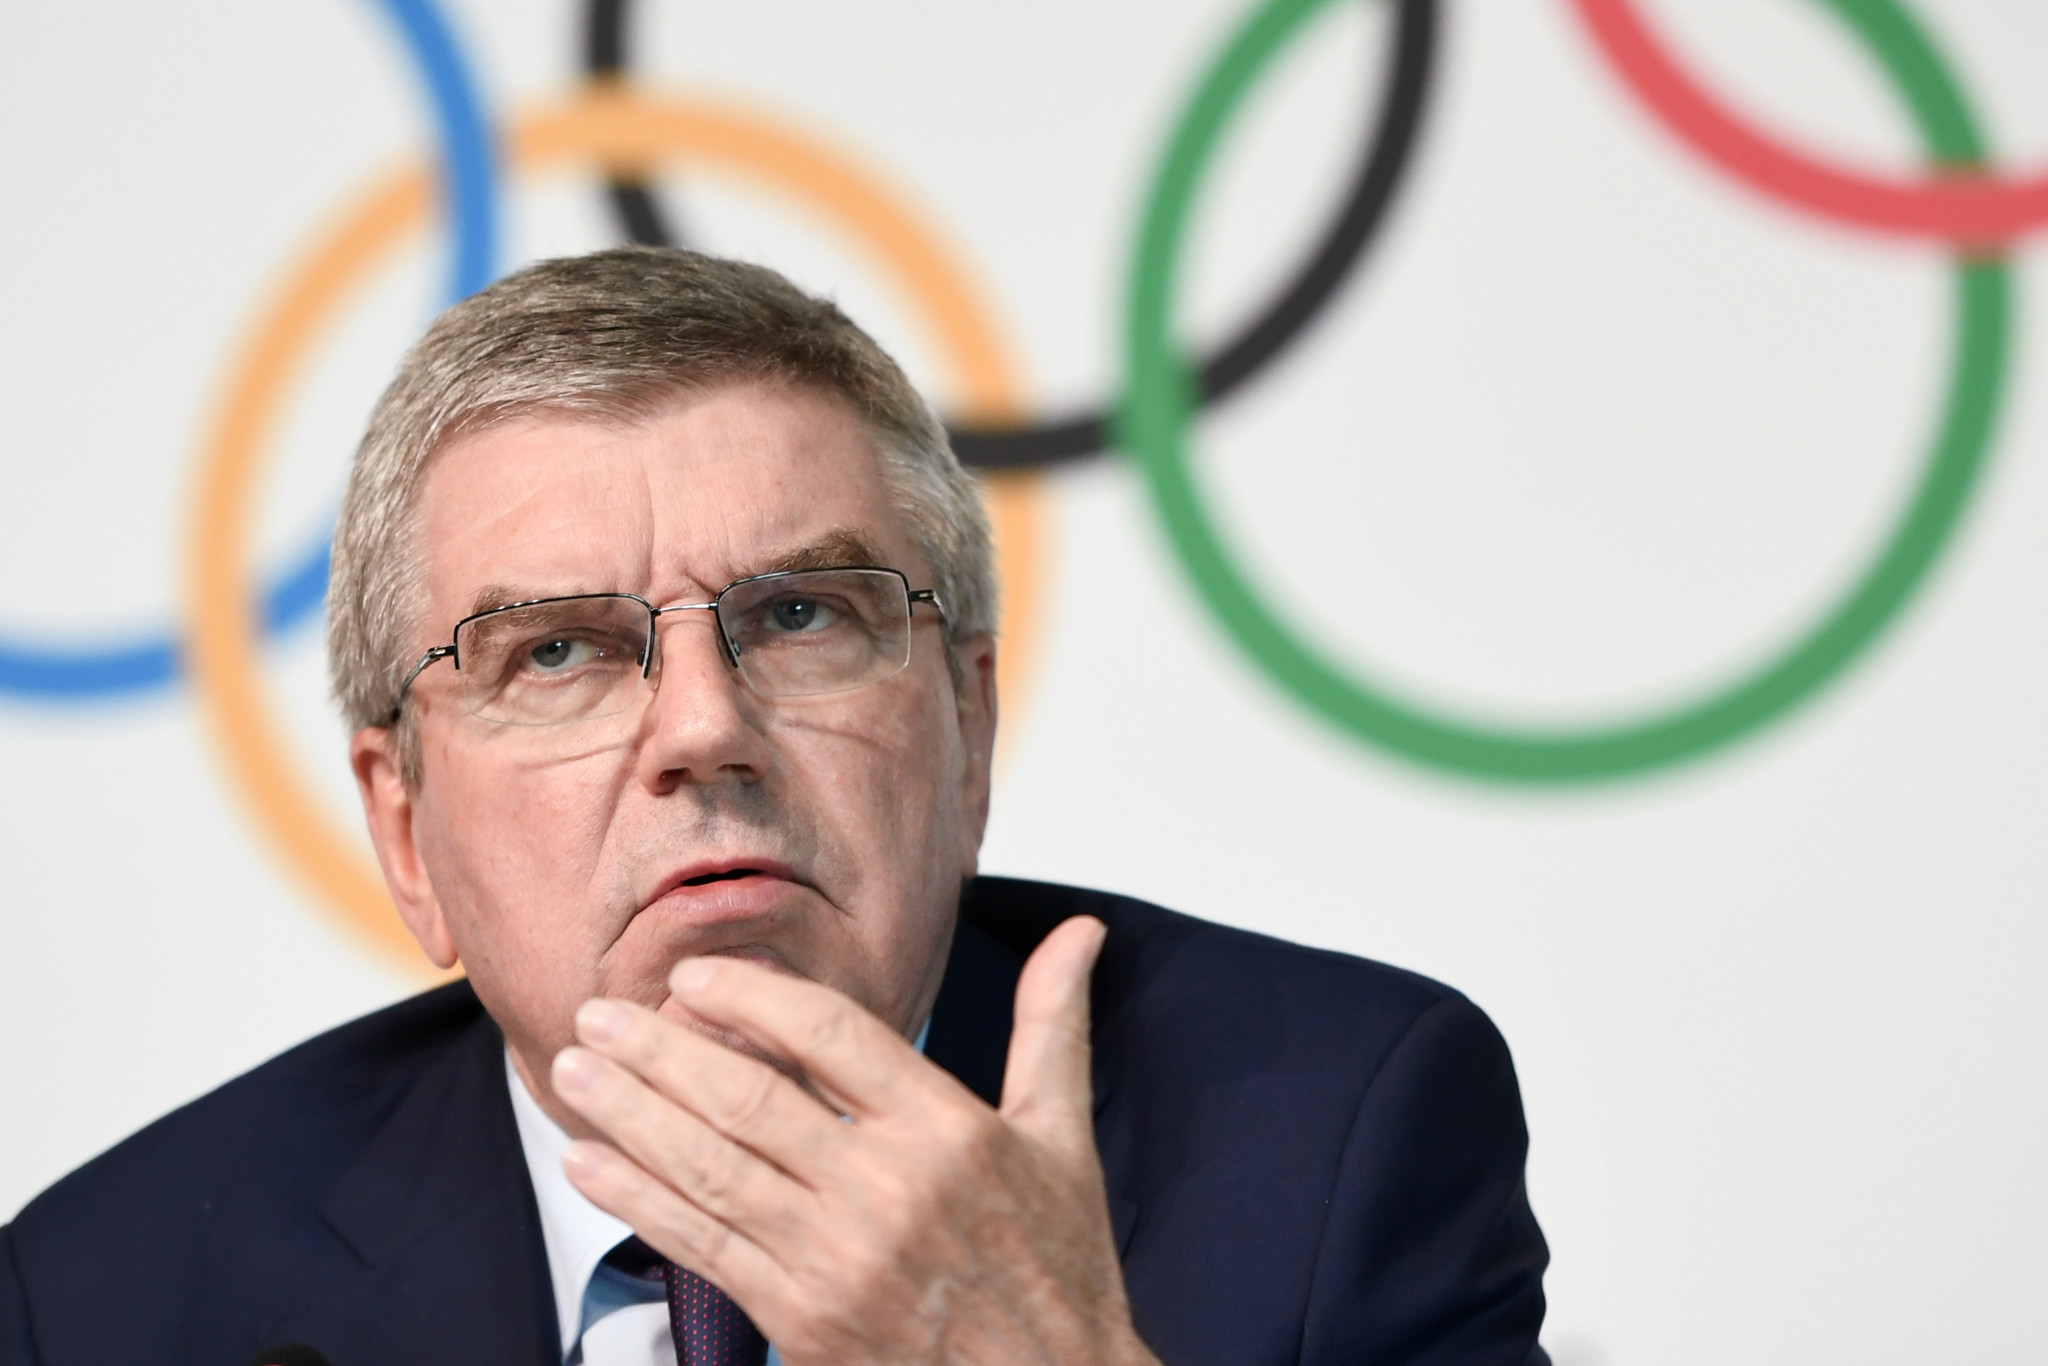 IOC President Thomas Bach suggested the organisation may look towards recommending a single host for the Games ©Getty Images